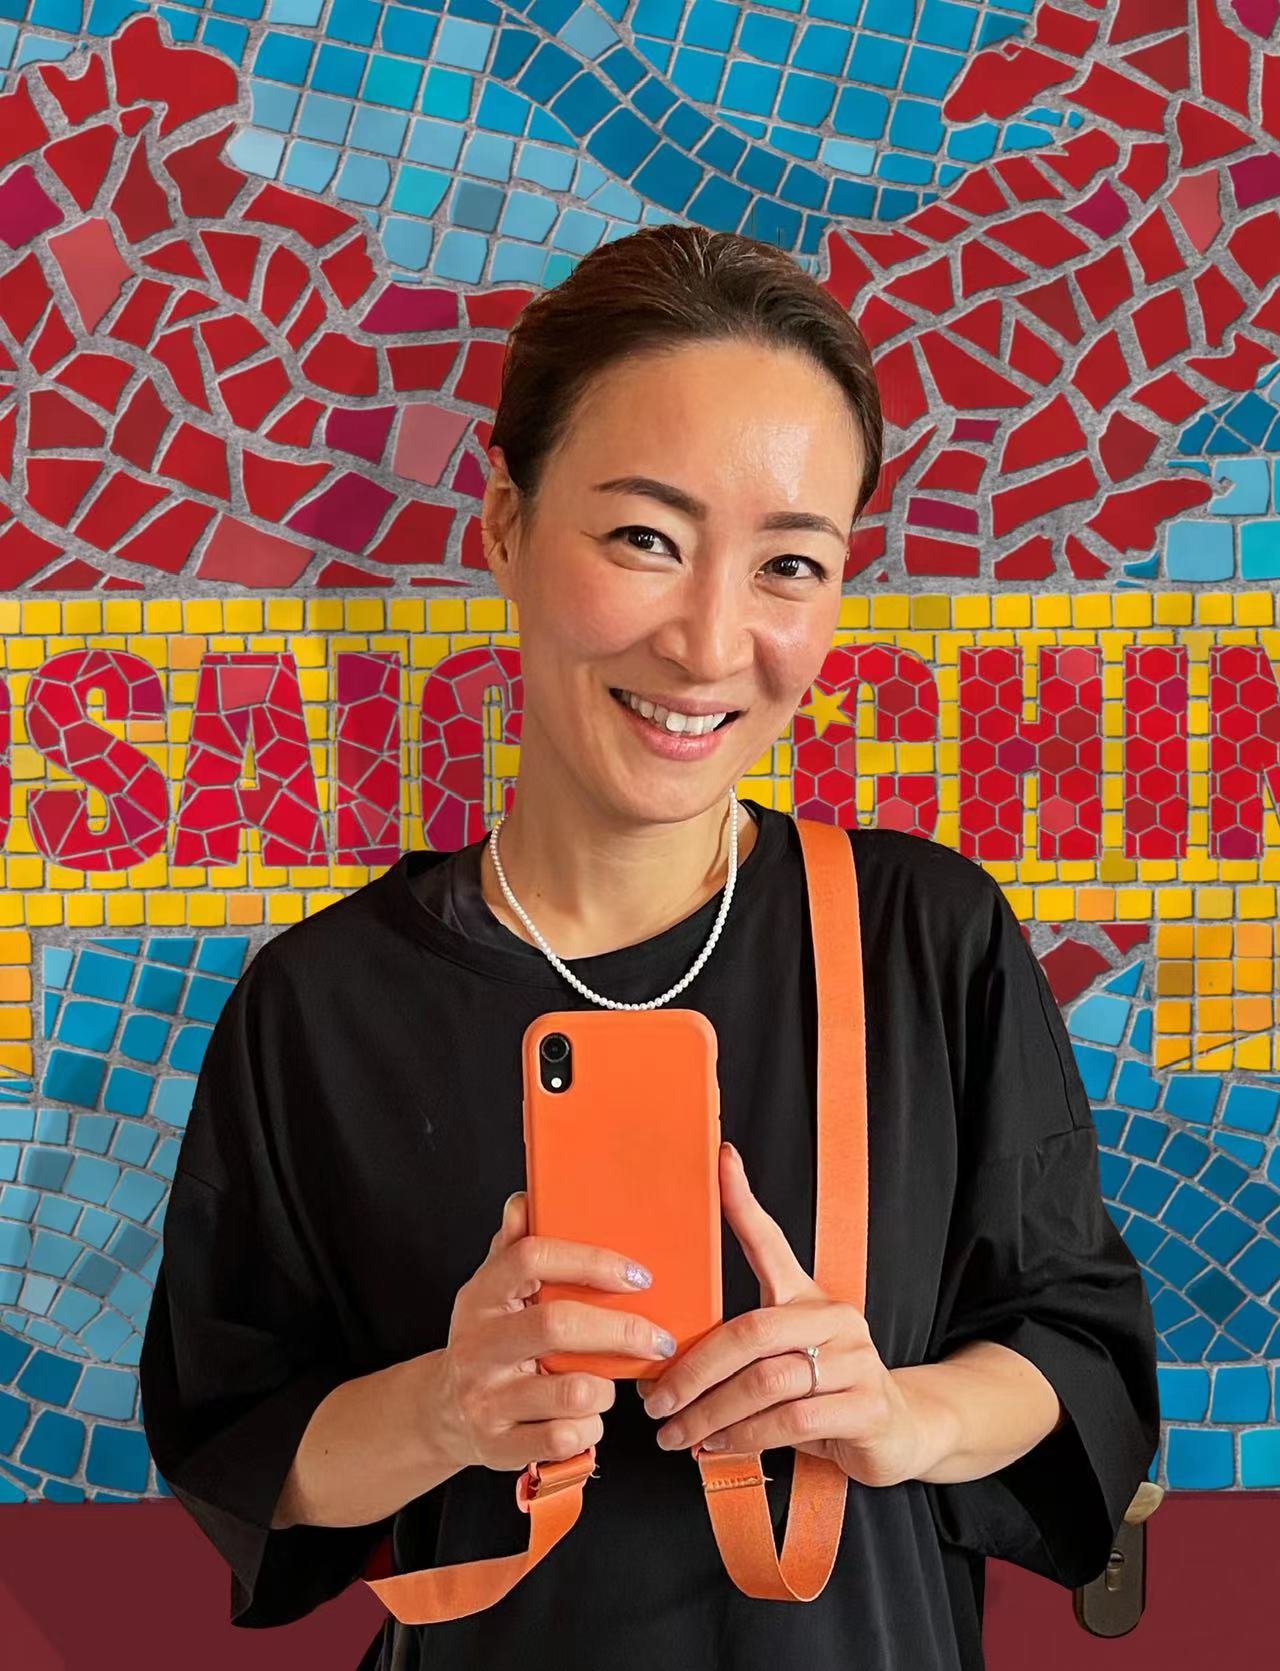 Kim YoungAh's object: Her bright orange phone carrier, which symbolises the efficiency and mobility she needs to be successful as a corporate employee as well as a mother of two kids.